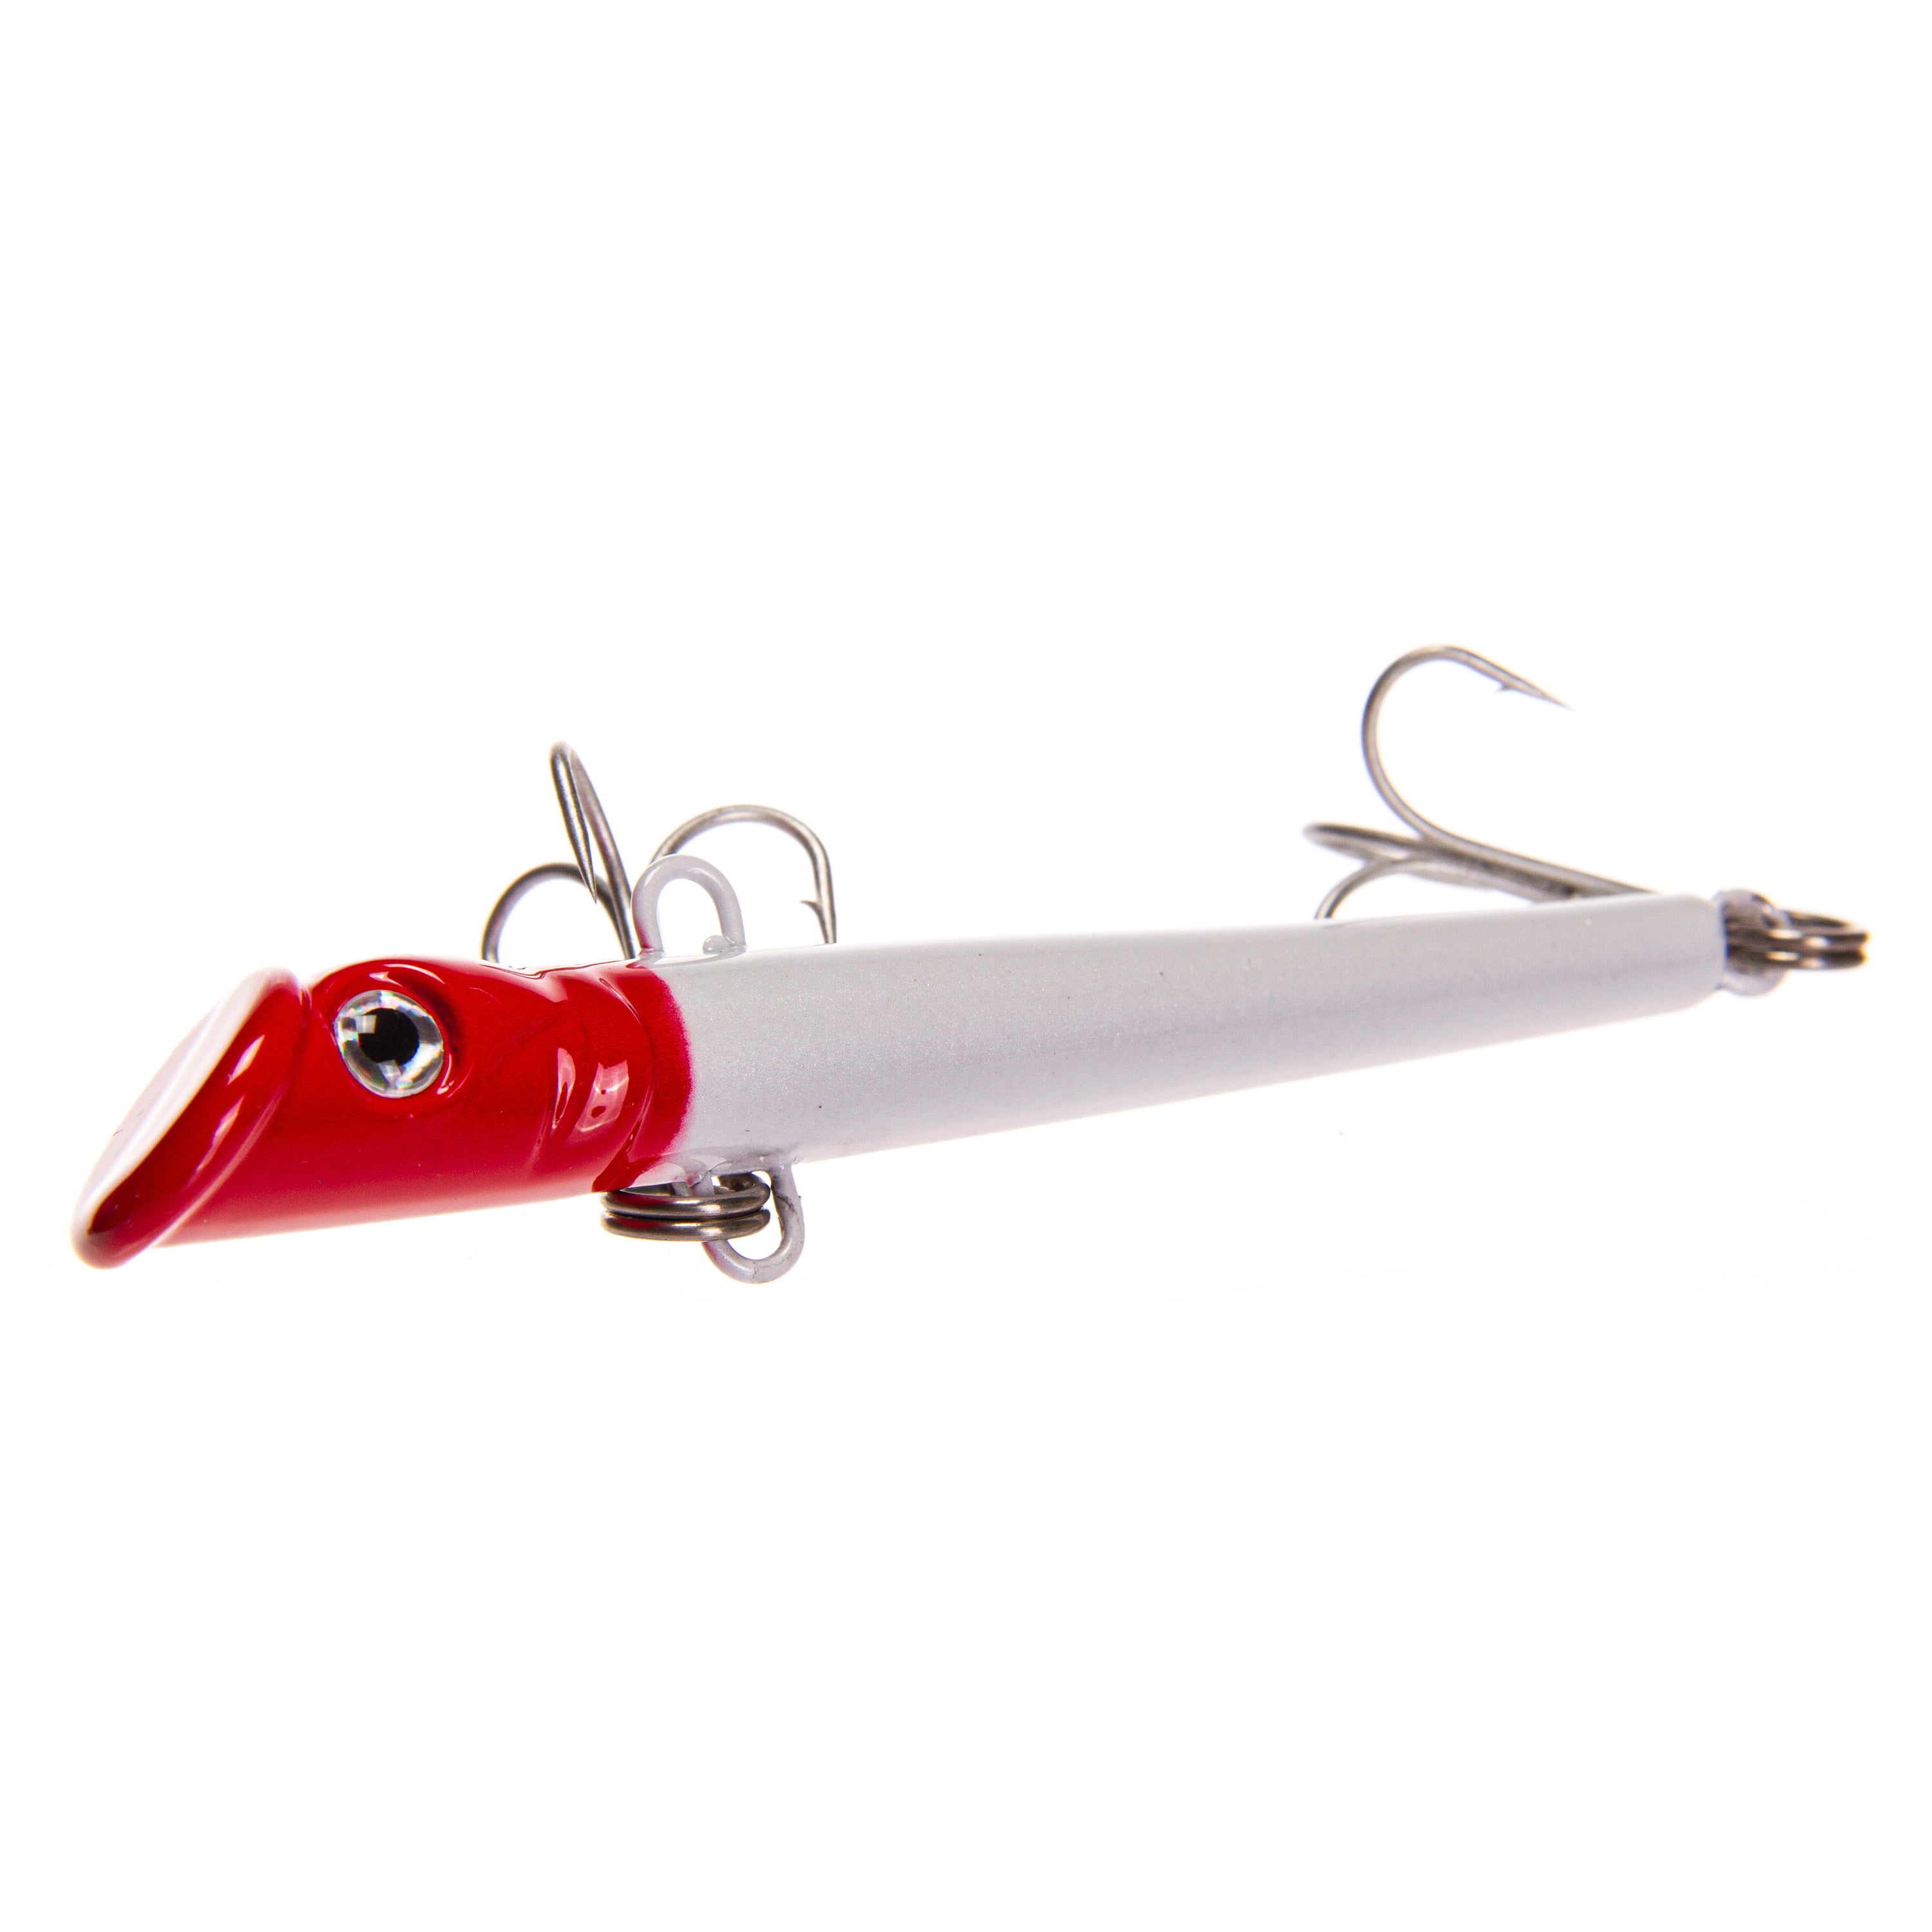  Yctze Jig Fishing Lures, Artificial Vib Fishing Lure 5Pcs for  River for Bank (Red Head Silver Body) : Sports & Outdoors